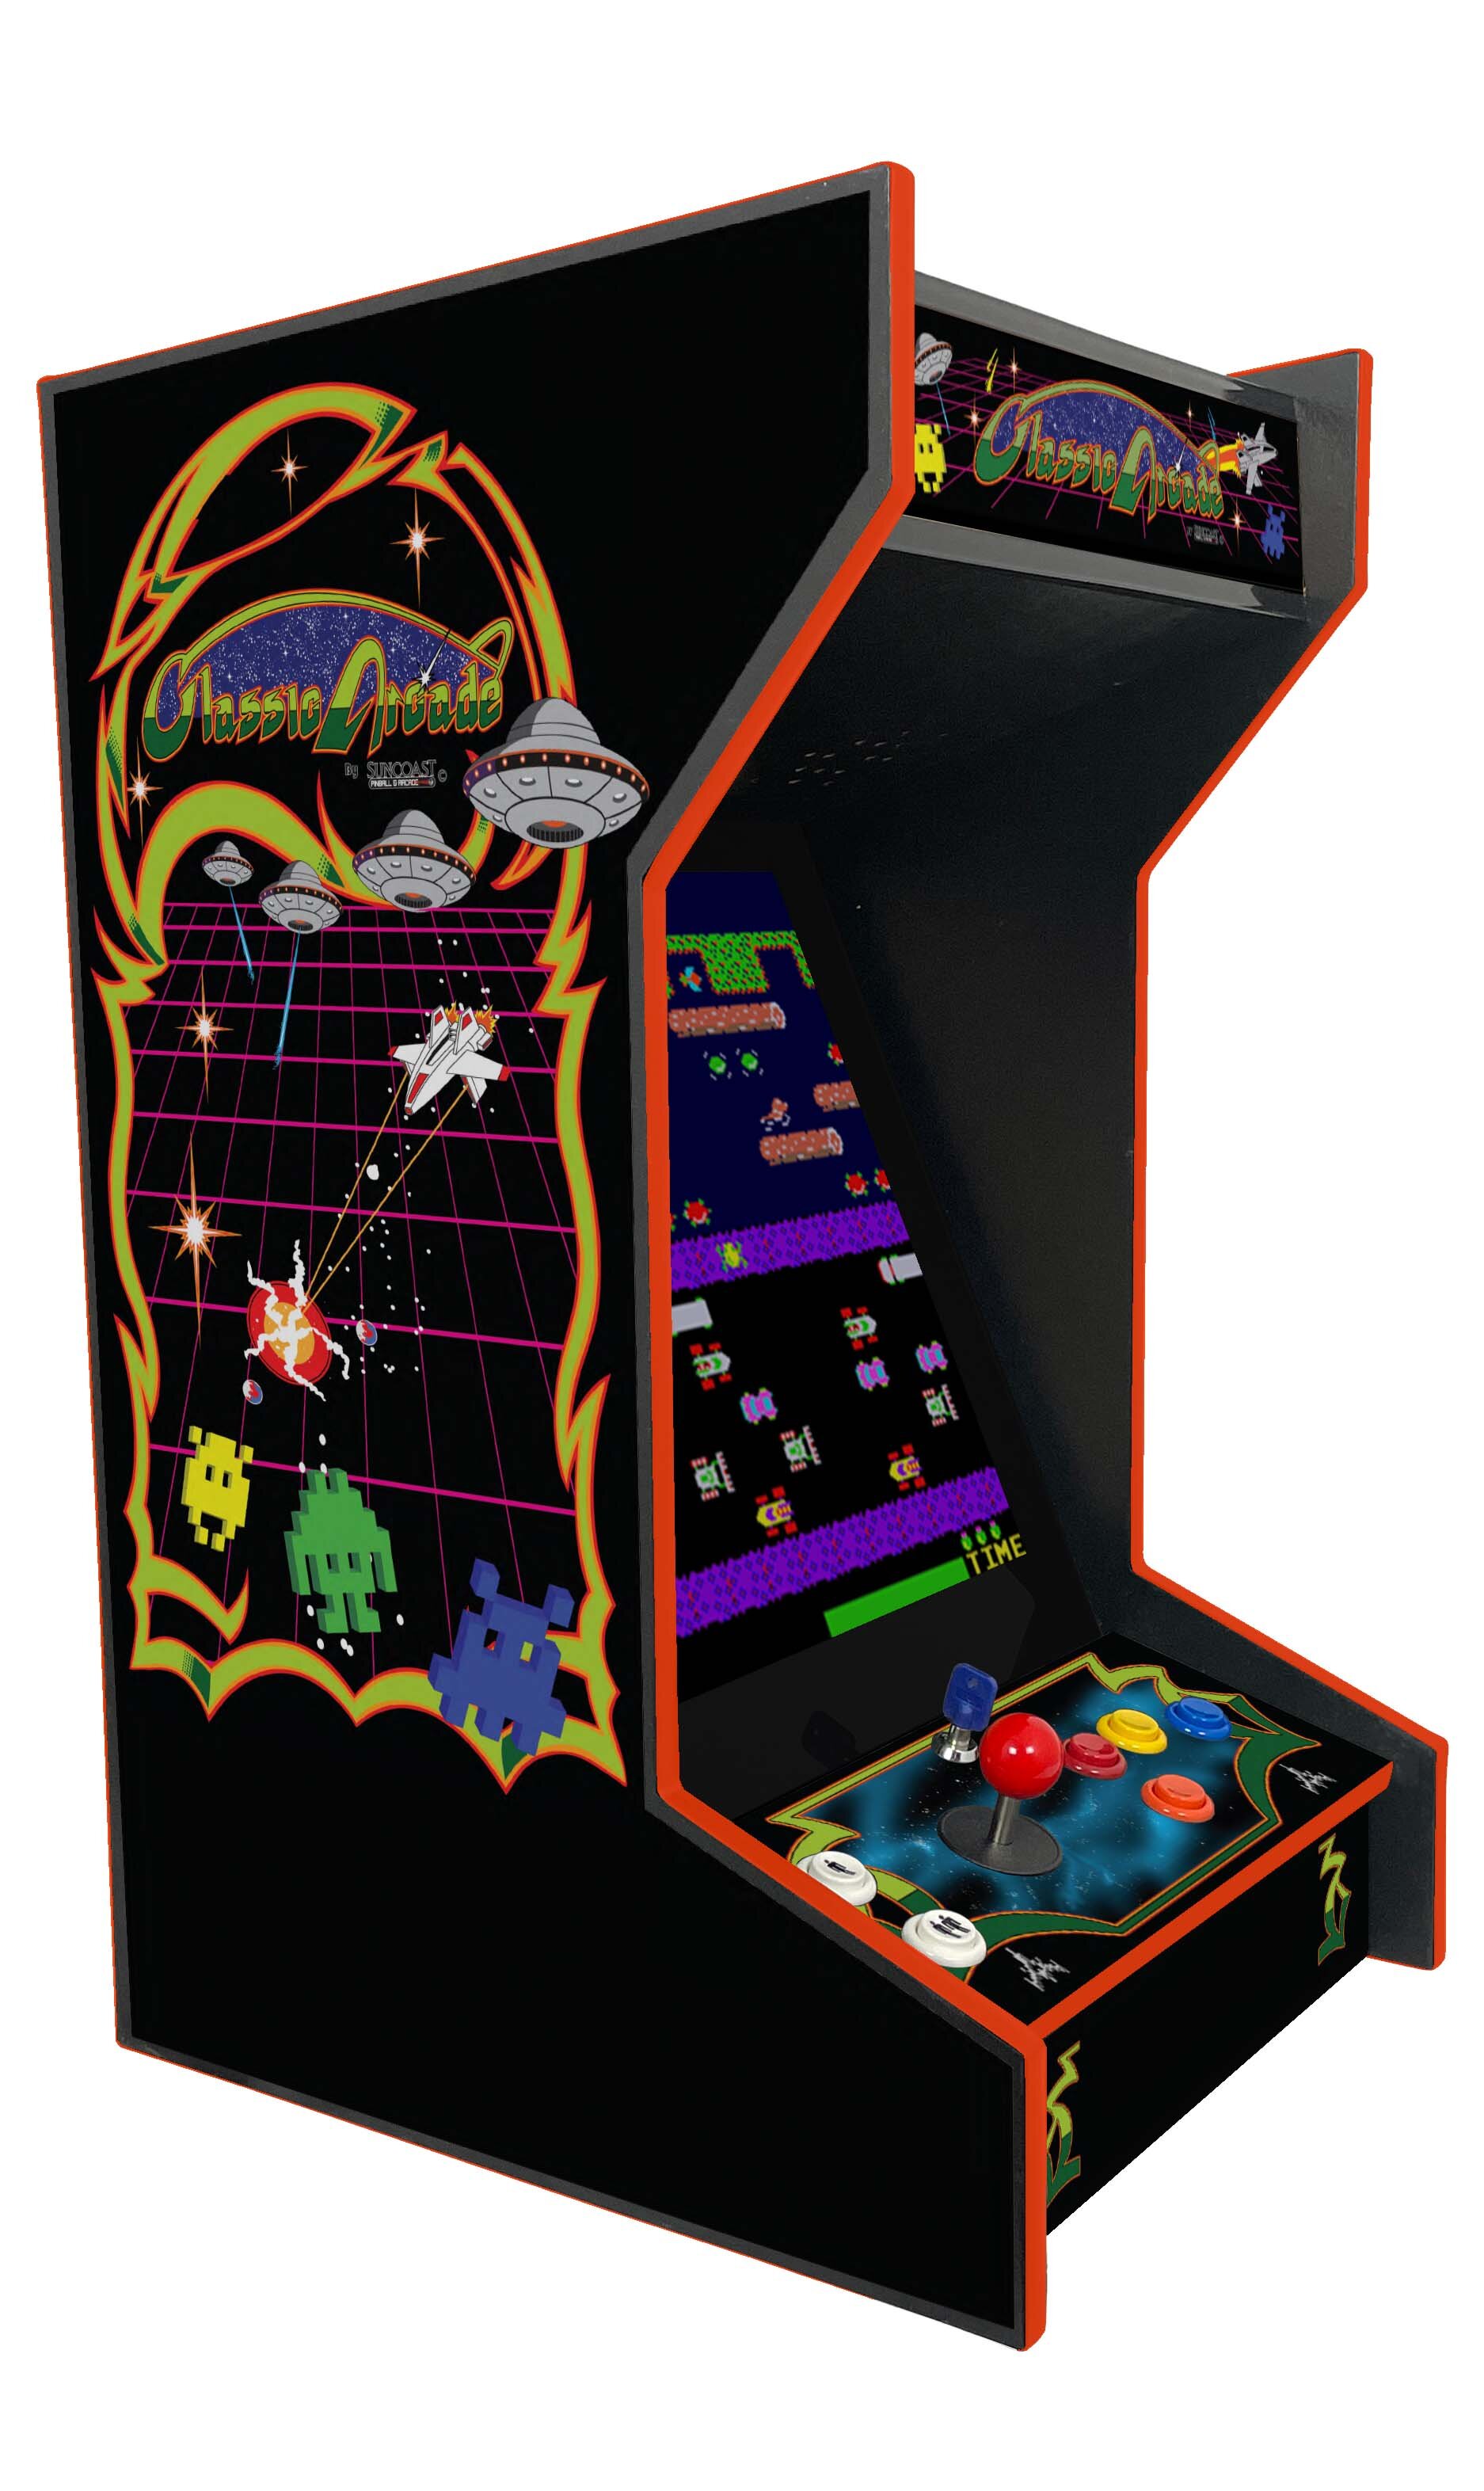 Suncoast Arcade 1 Player Plug-In Arcade Game with 60 Games Included Wayfair